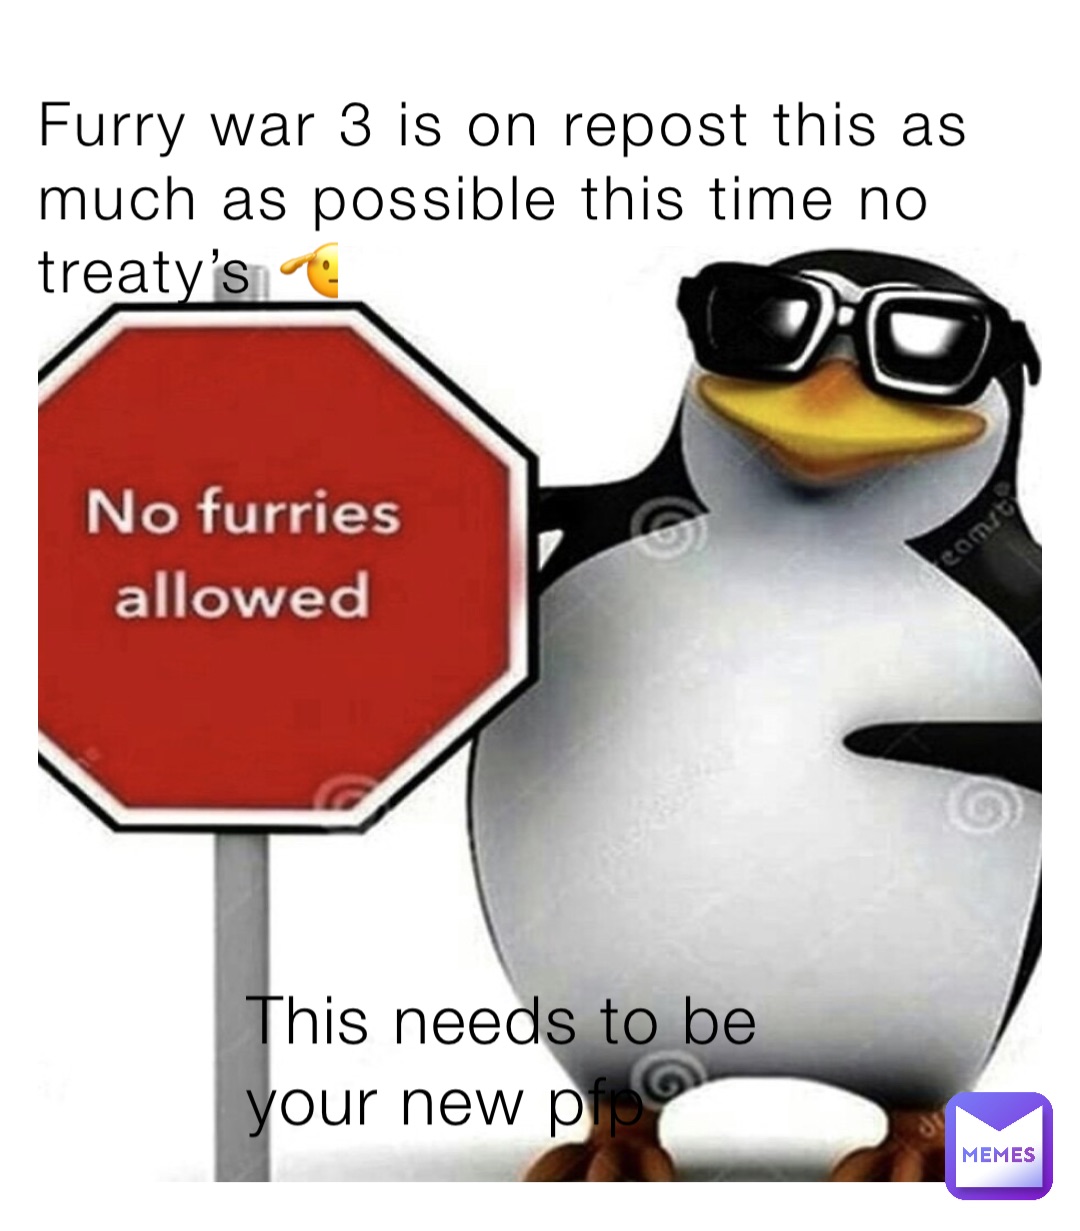 Furry war 3 is on repost this as much as possible this time no treaty’s 🫡 This needs to be your new pfp